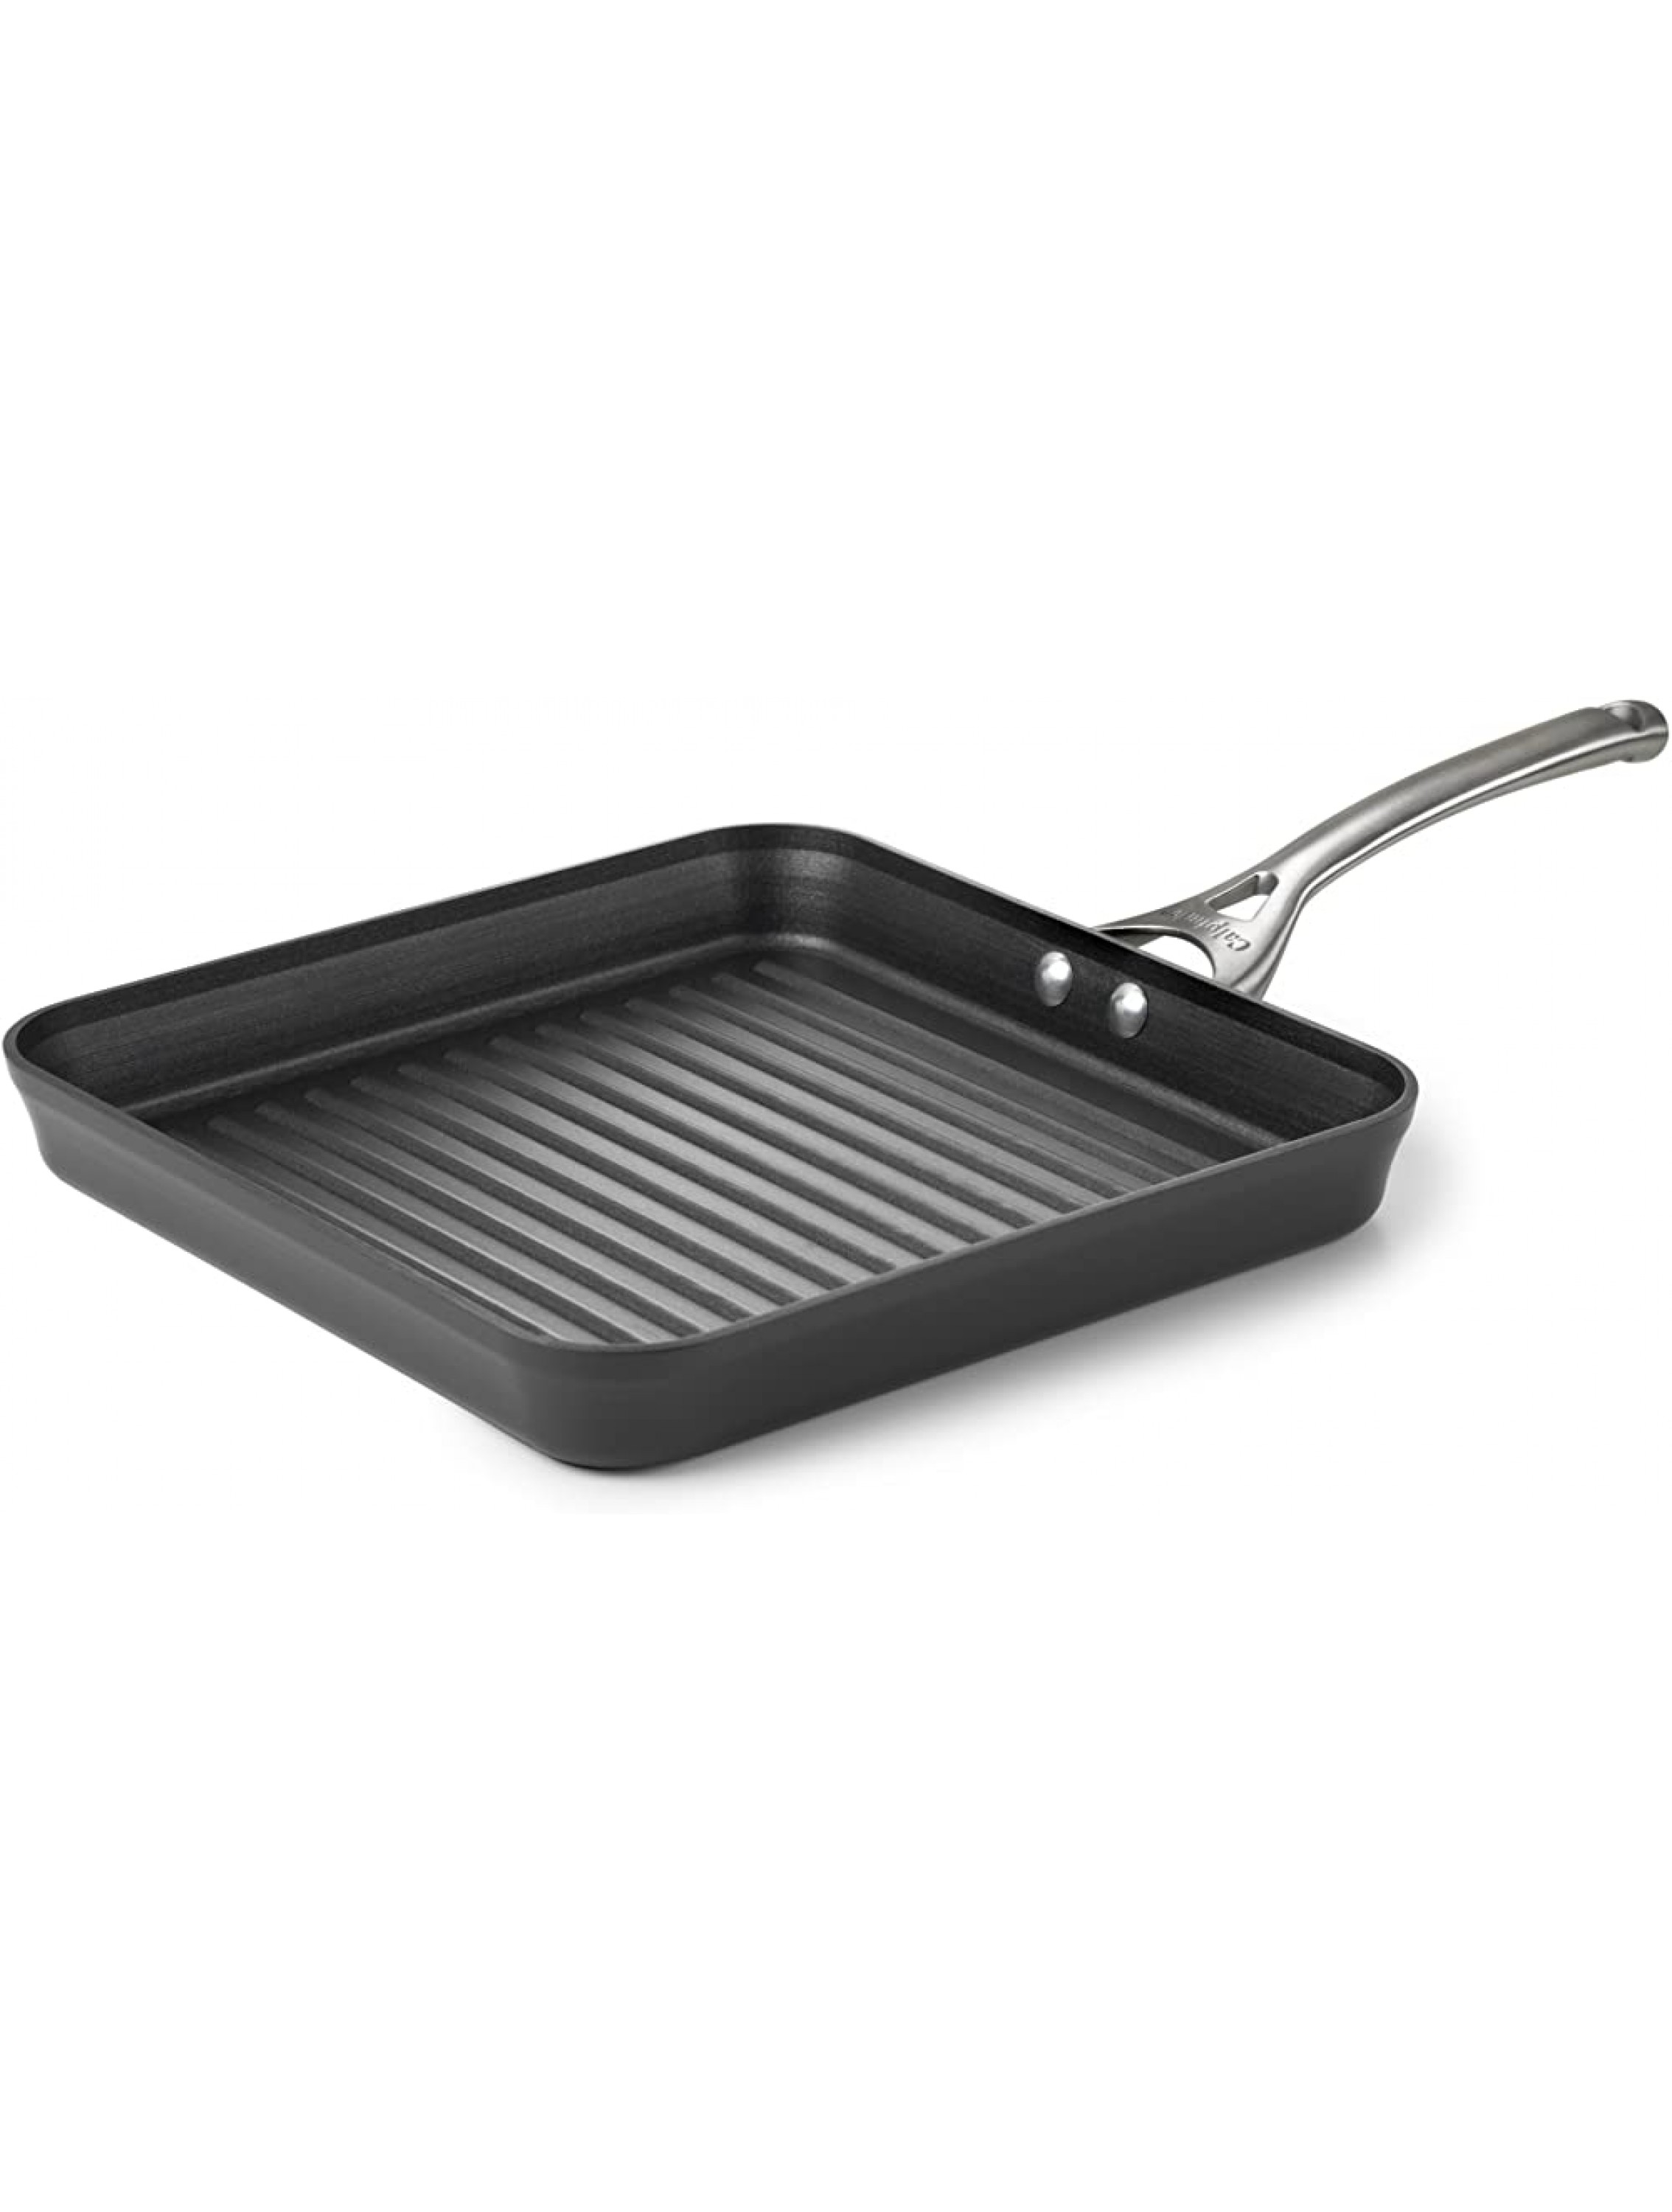 Calphalon Contemporary Hard-Anodized Aluminum Nonstick Cookware Square Grill Pan 11-inch Black - B39OUMK0N